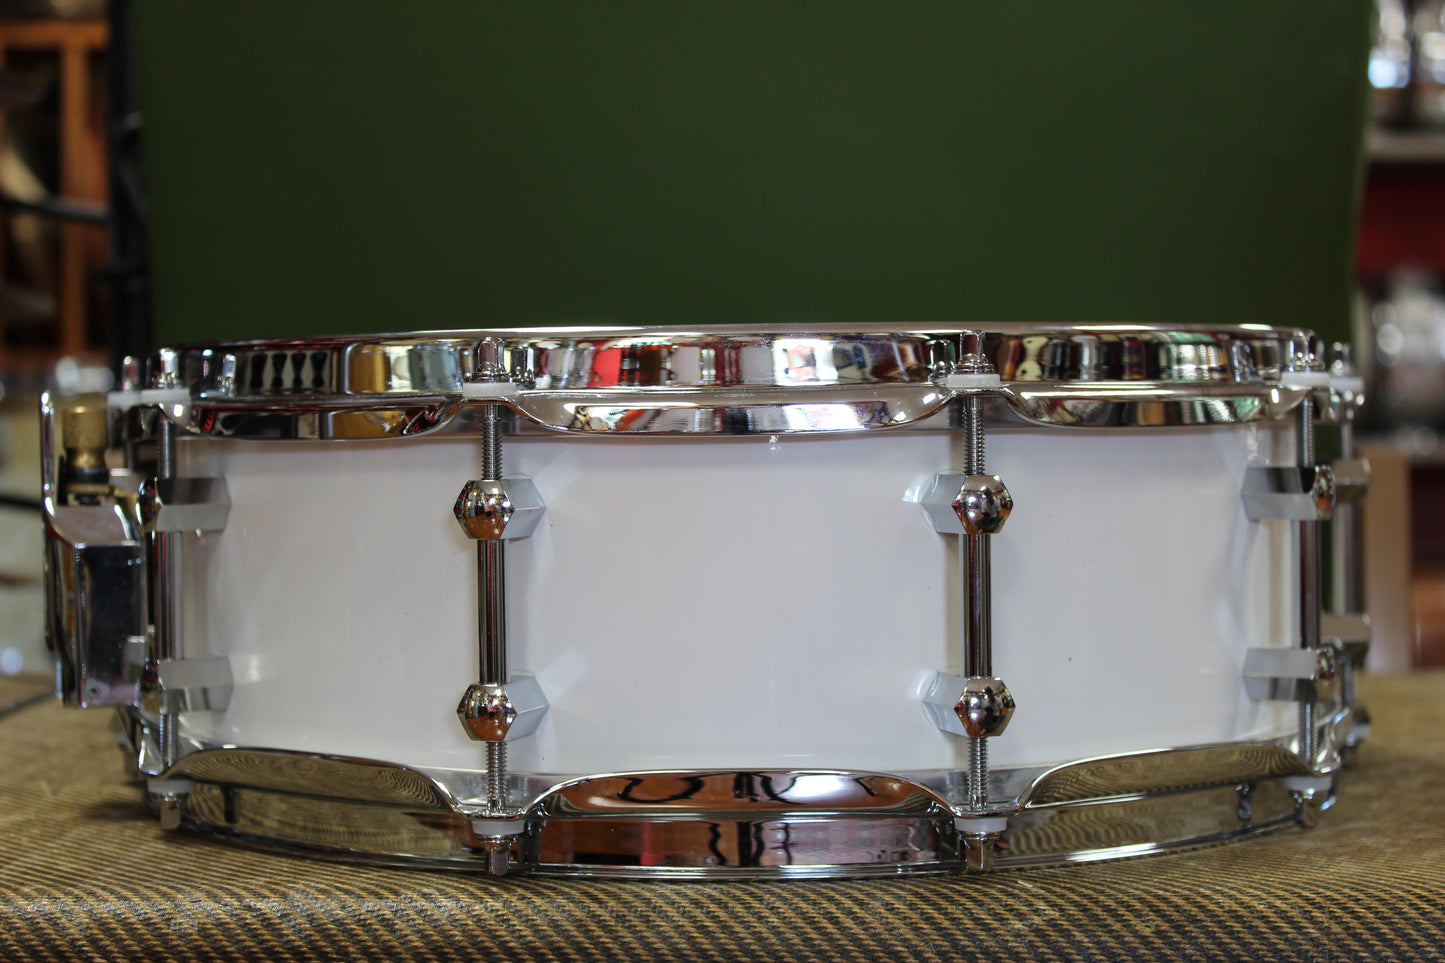 2019 Noble & Cooley Alloy Classic 4.75x14 White Gloss